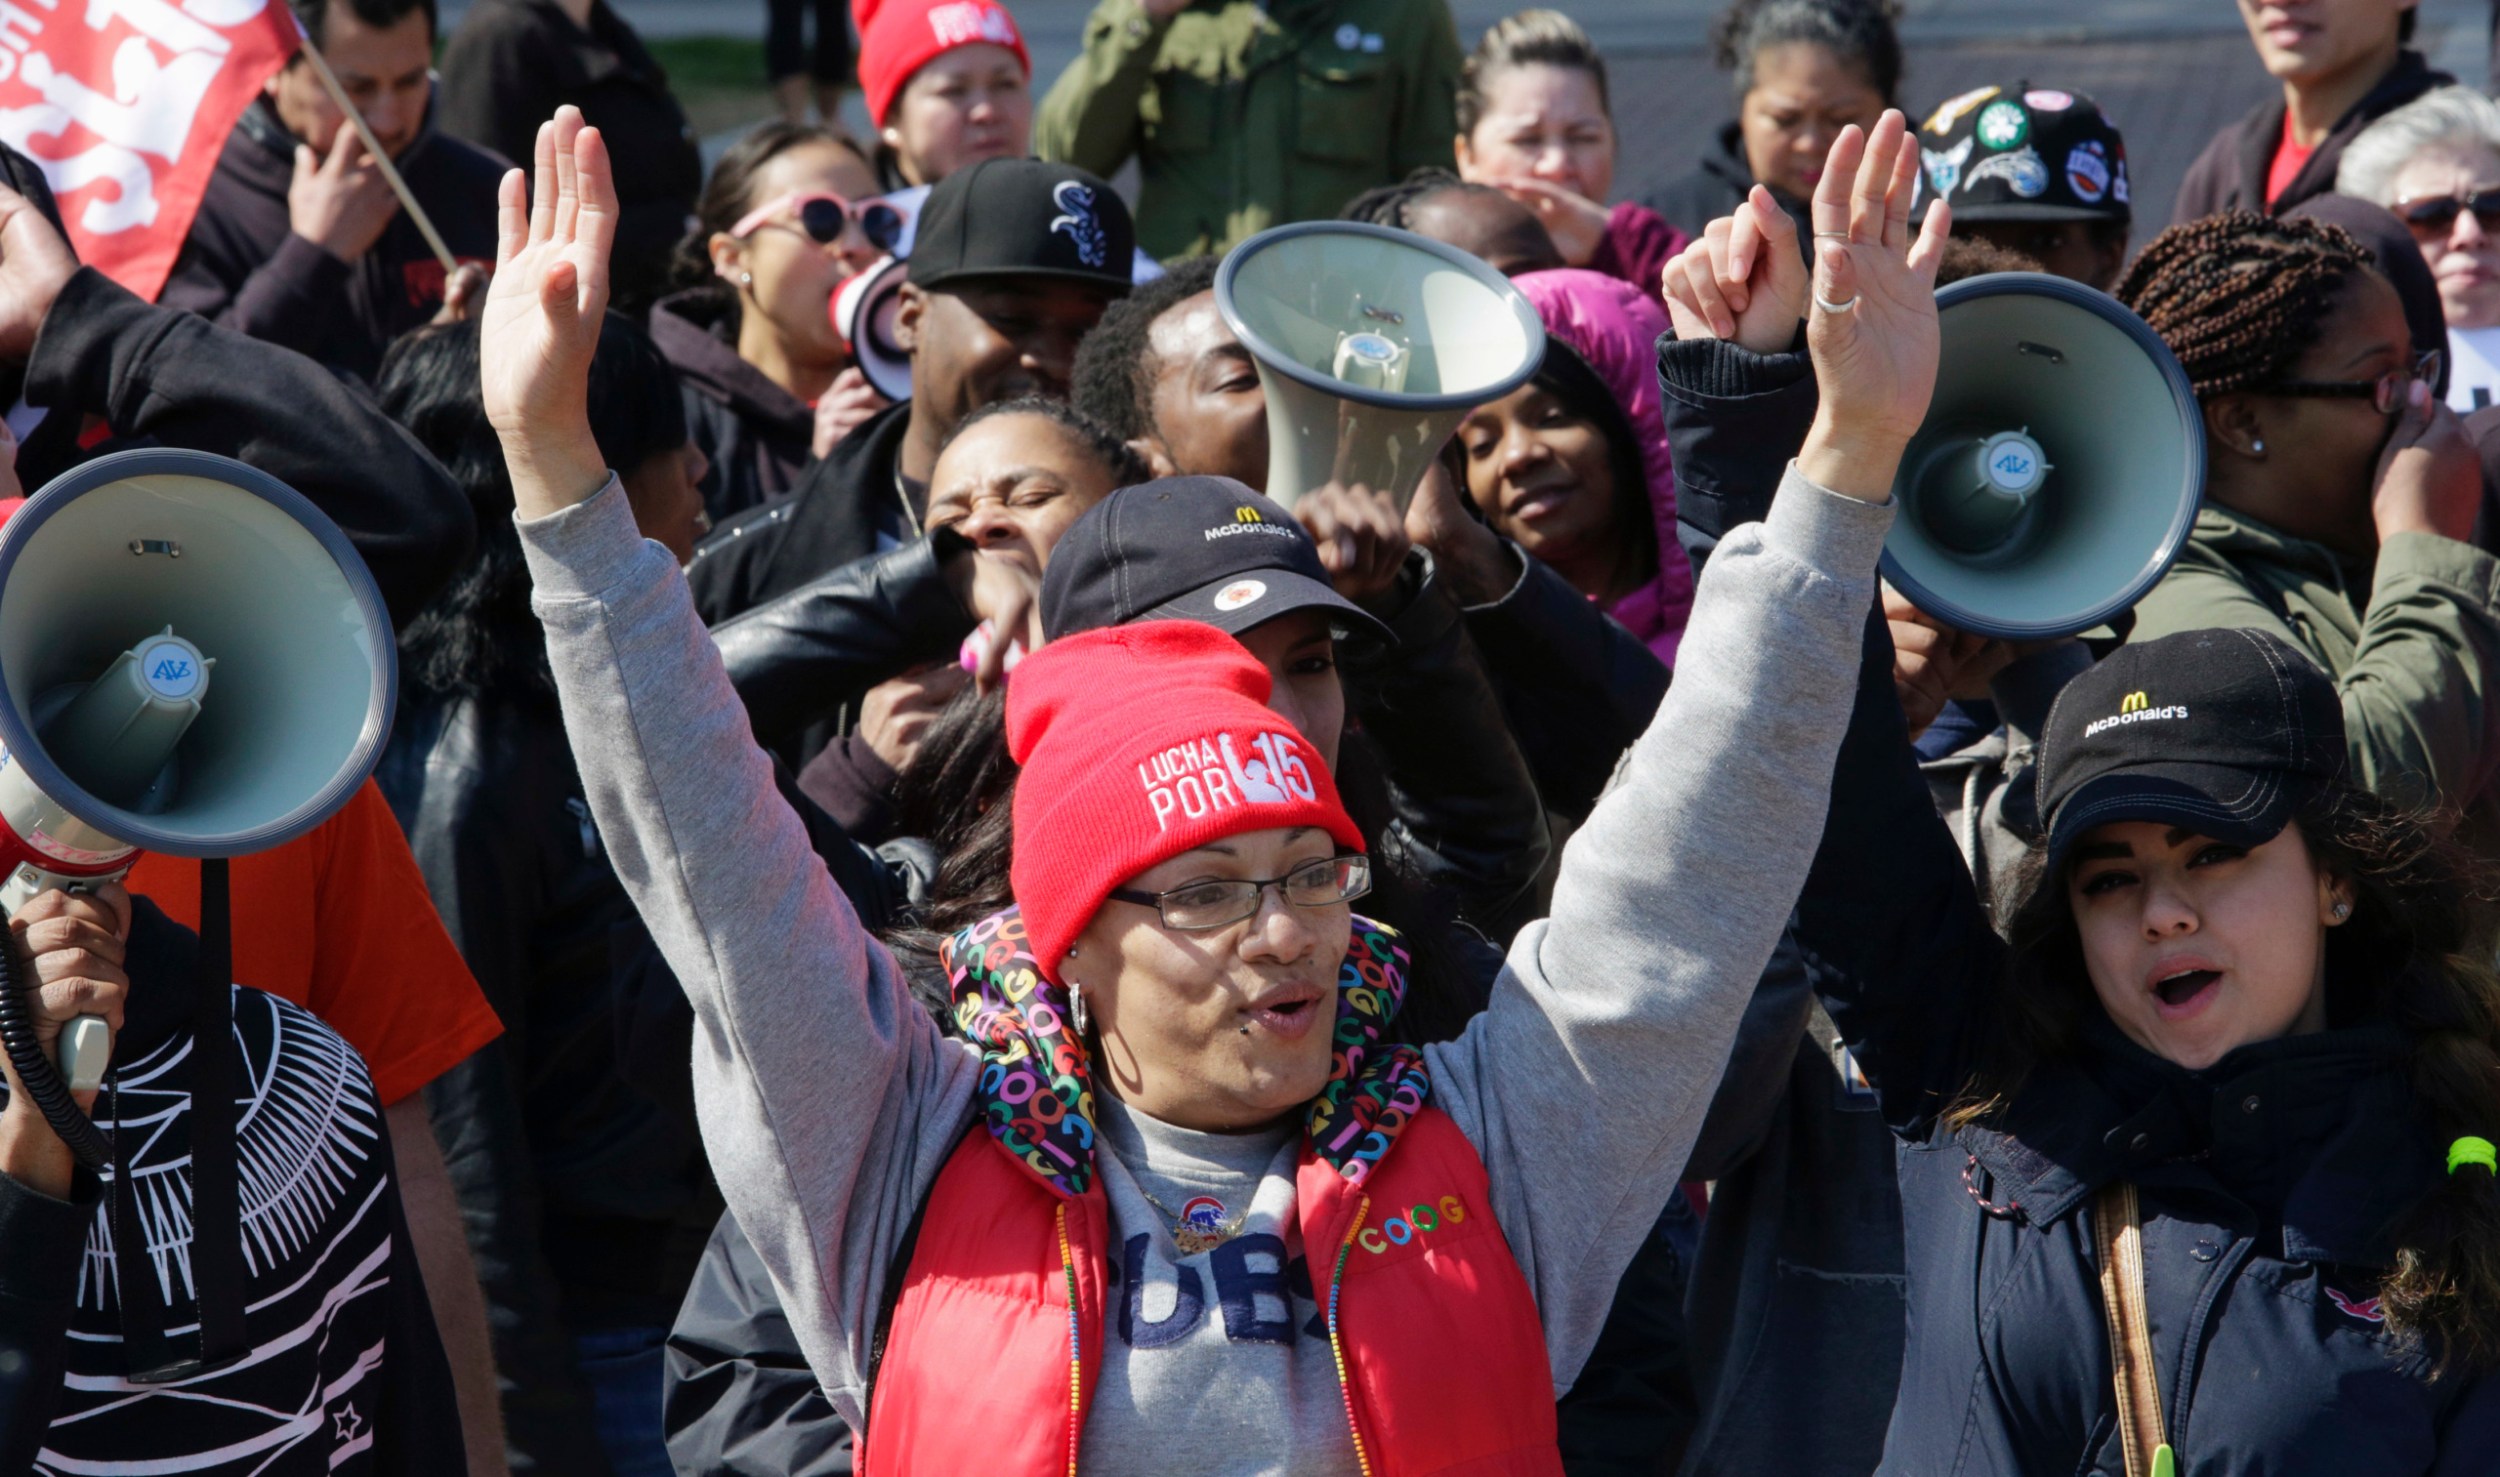 Fast-food worker Maria Rodriguez joins protesters gathered in Chicago on April 14, 2016, to call for a union and pay of $15 per hour. (AP/Teresa Crawford)